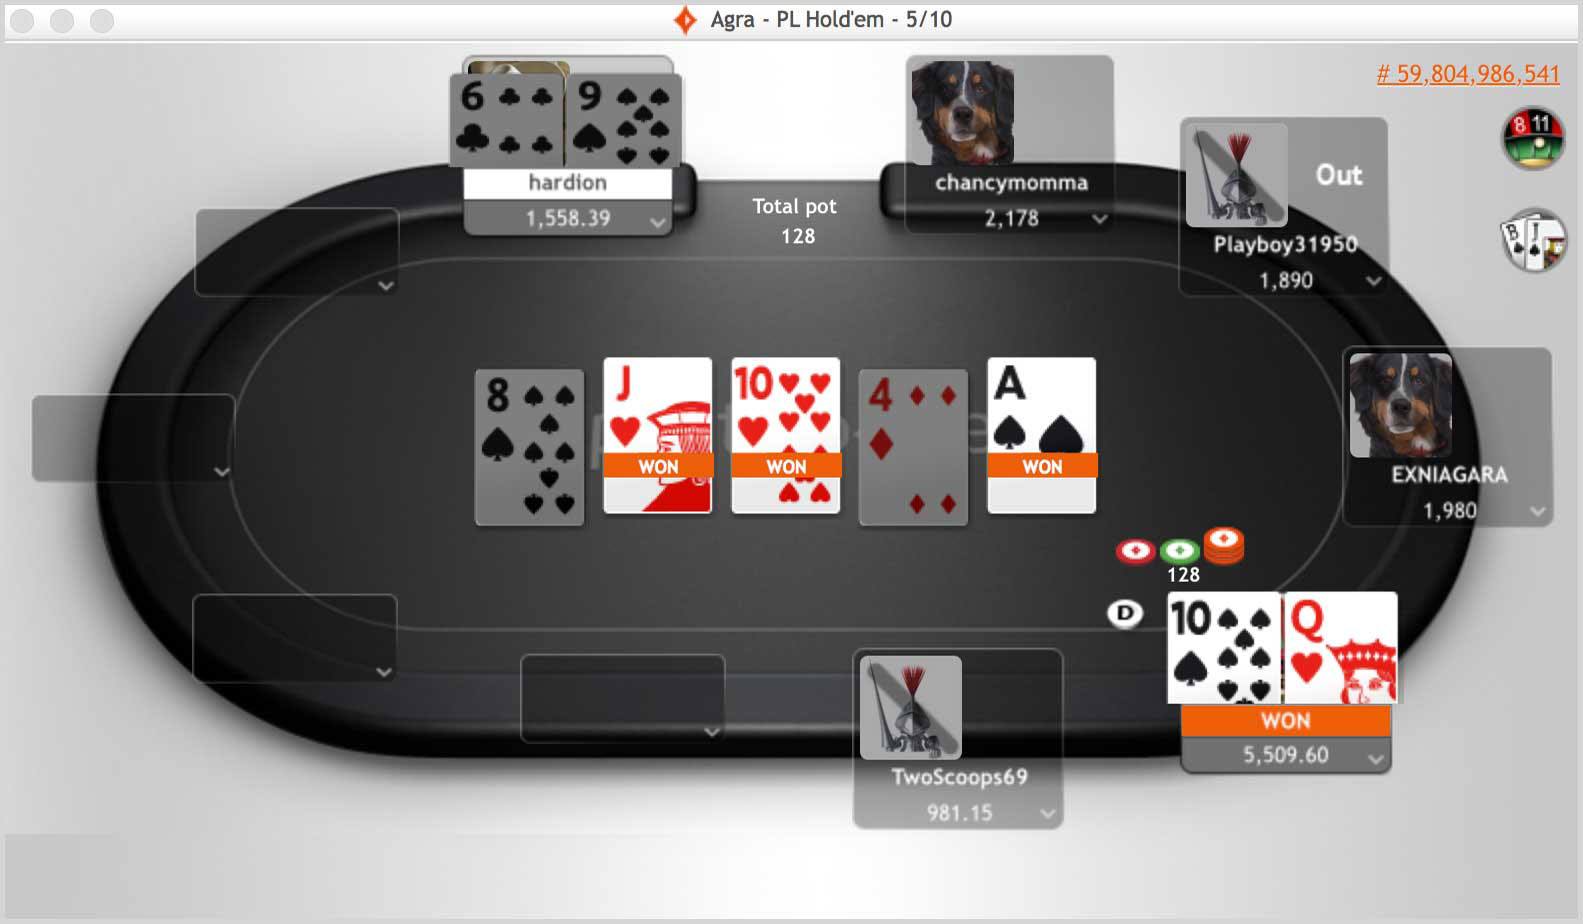 Partypoker Could Launch Online Poker Site in Nevada Under GVC License